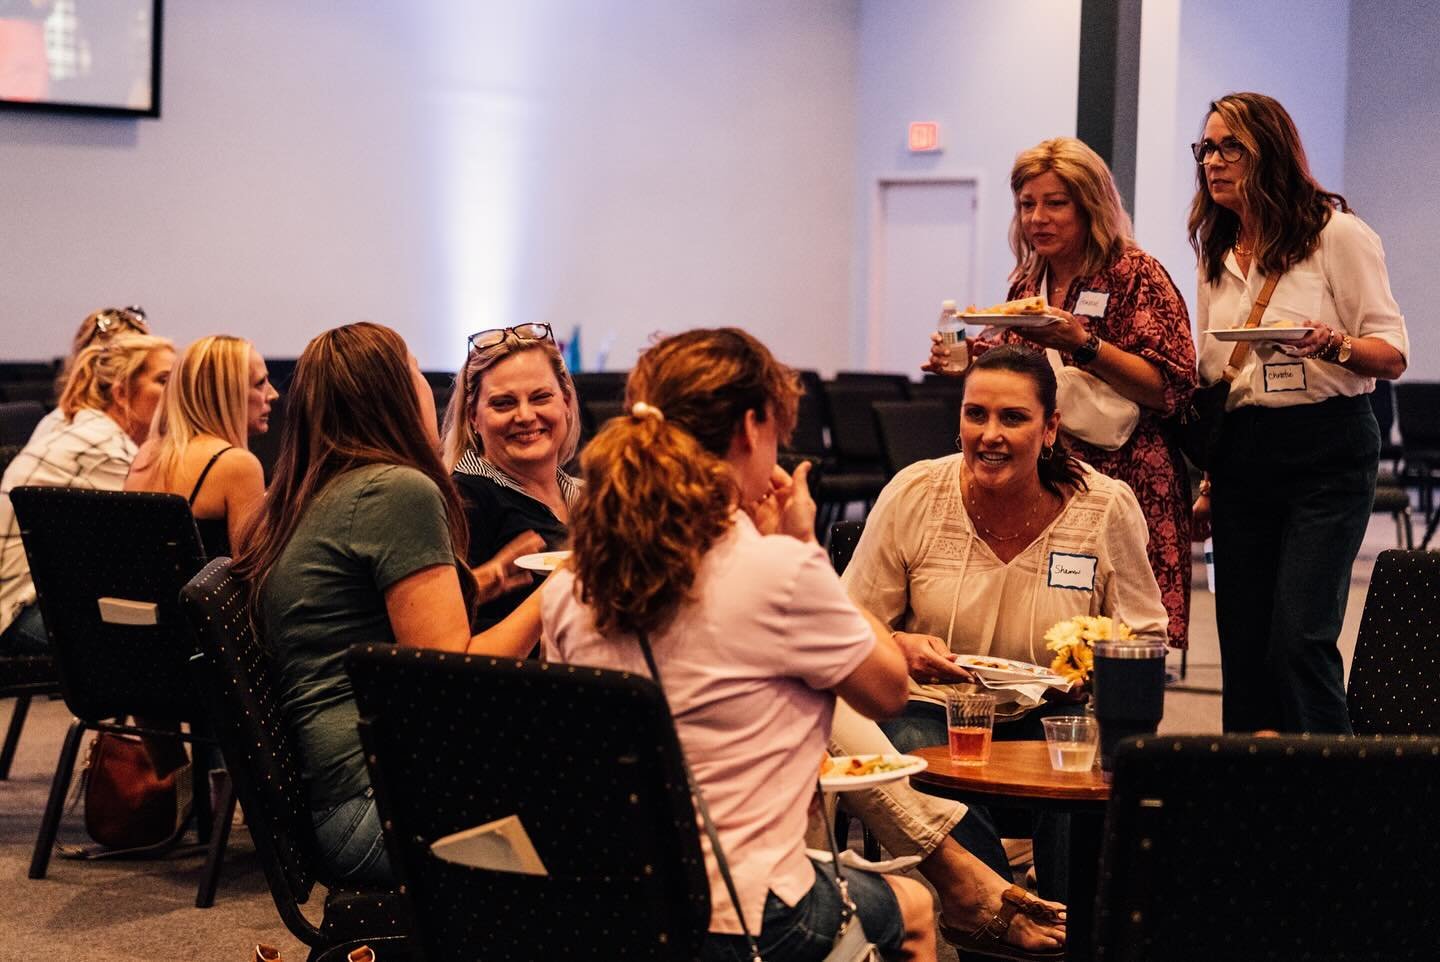 Ladies, you&rsquo;re invited to Women&rsquo;s Wednesday tonight at 6:30 p.m. for a time of connection and a special message from Nancy Smith and her daughter, Mitzi Foster. We look forward to seeing you there!